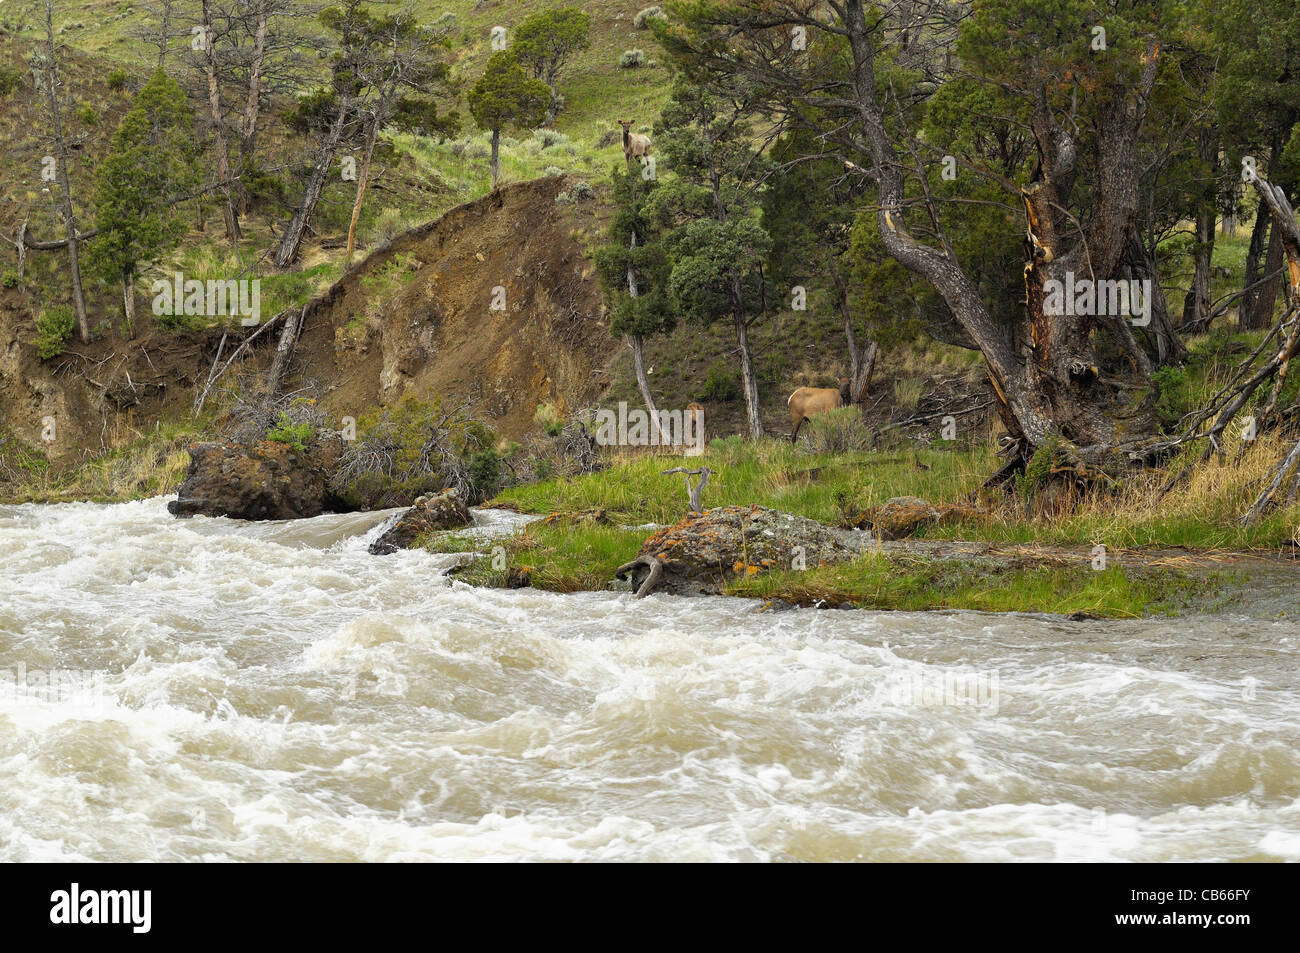 Elk along a wild and scenic mountain stream. Stock Photo